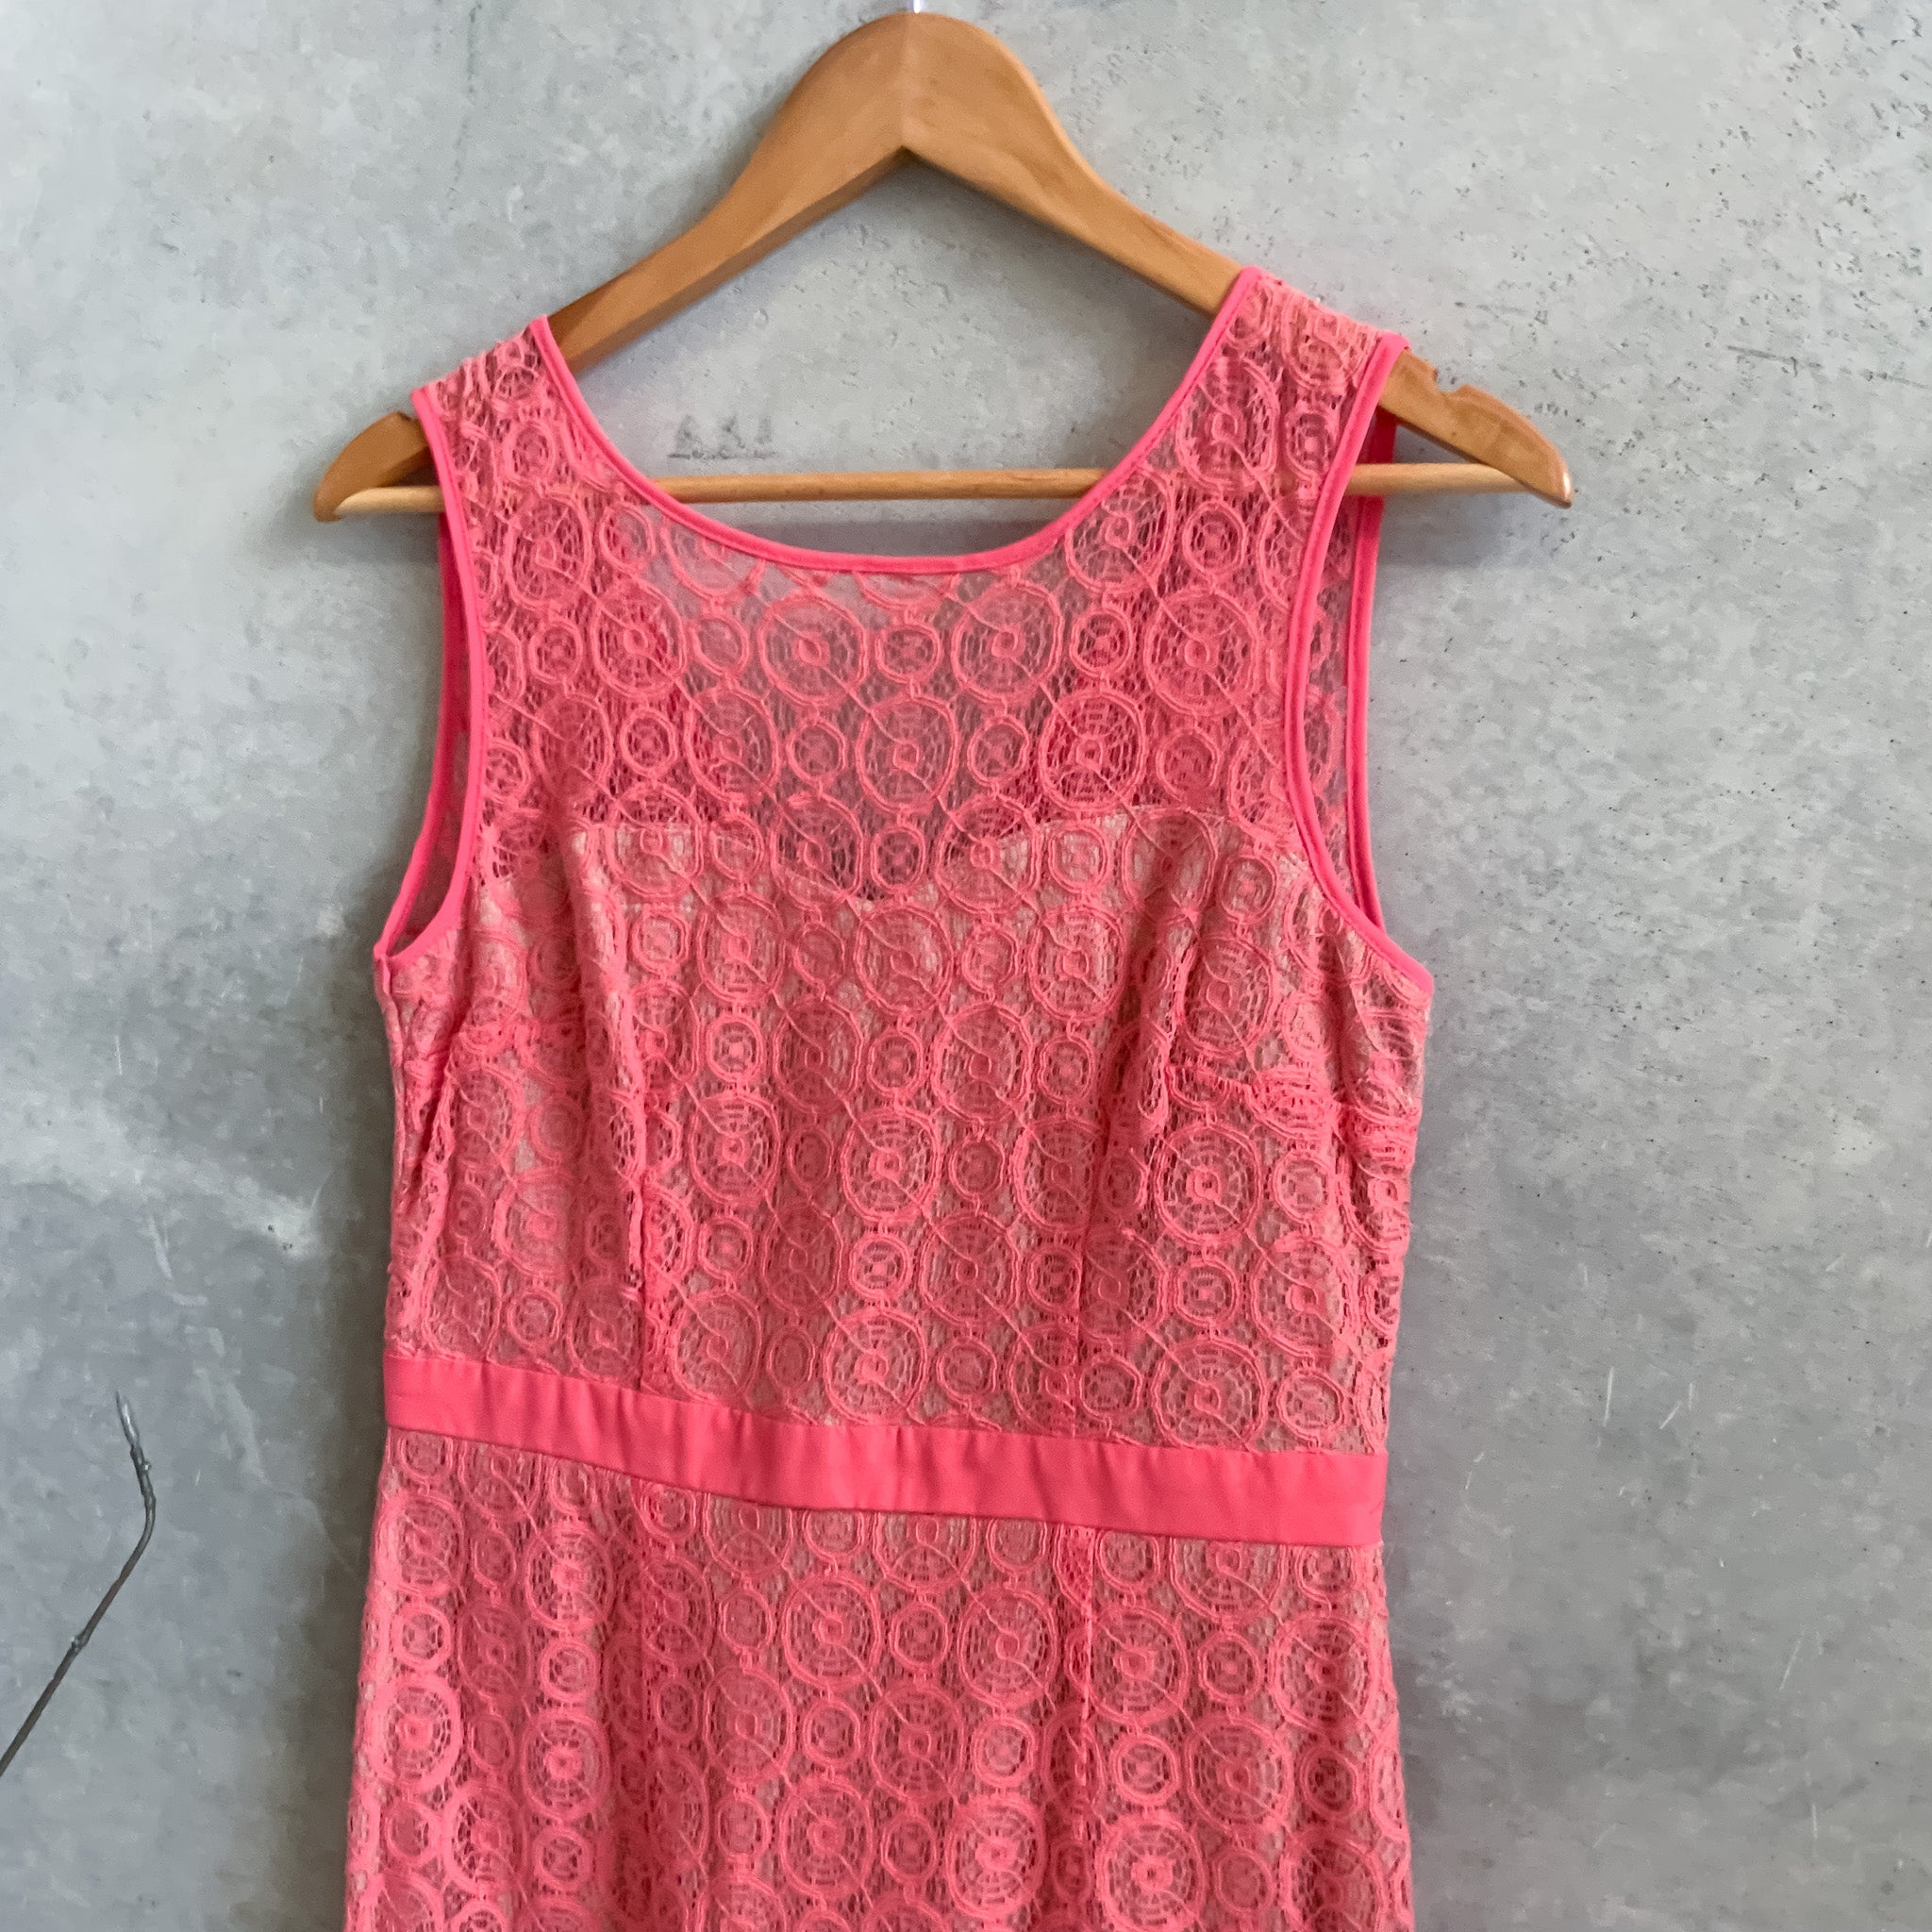 BNWT LIMITED EDITIONS Coral Pink Lace Shift Dress - Size 8